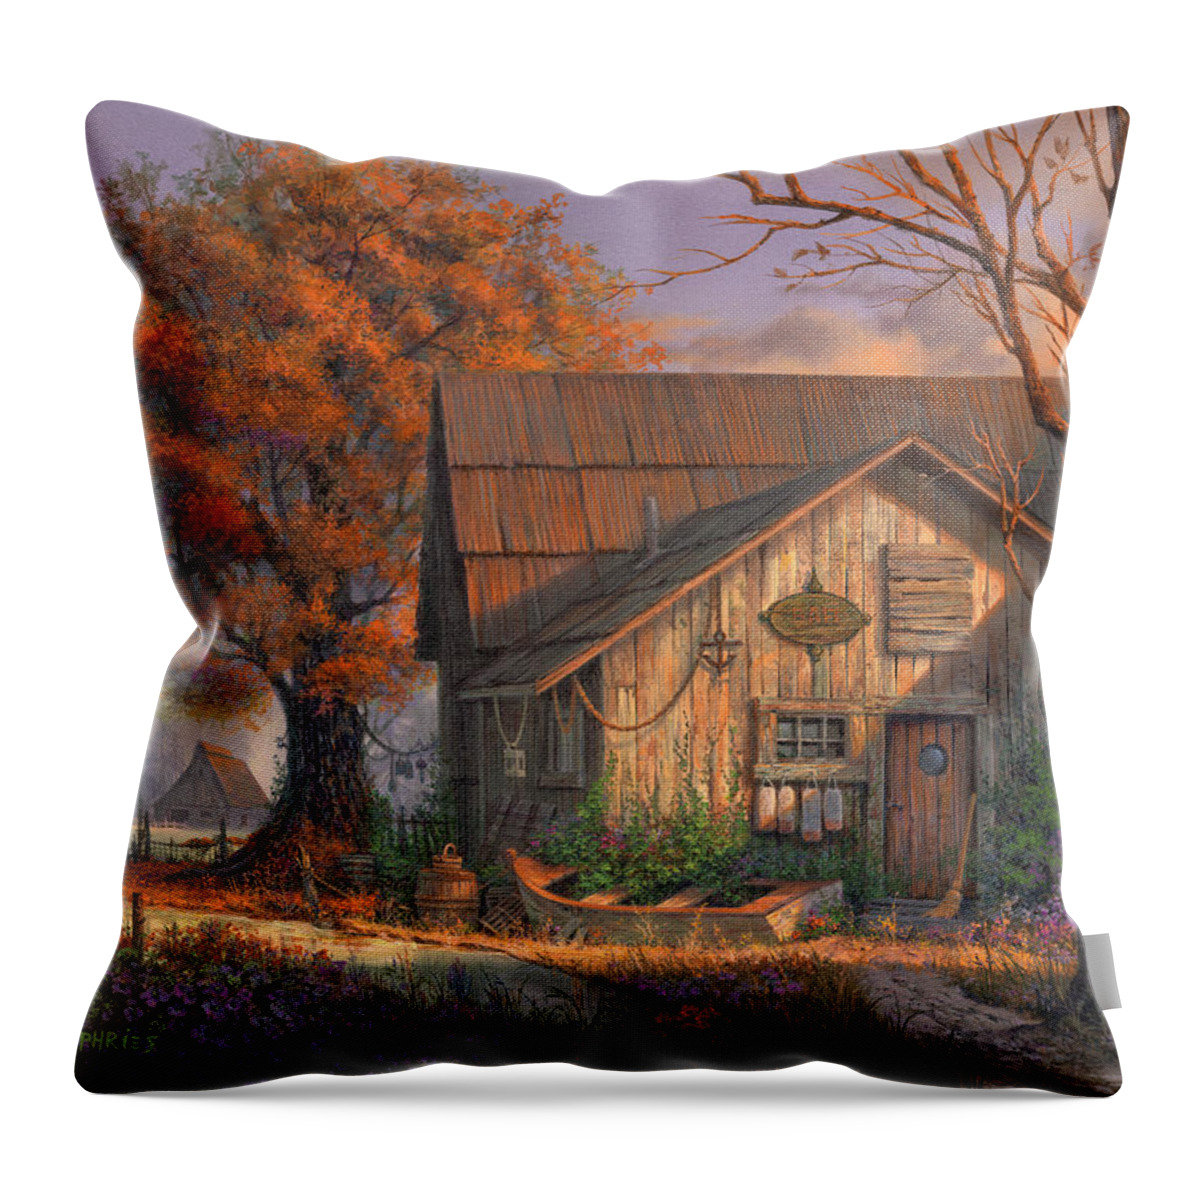 Michael Humphries Throw Pillow featuring the painting Afternoon Delight by Michael Humphries